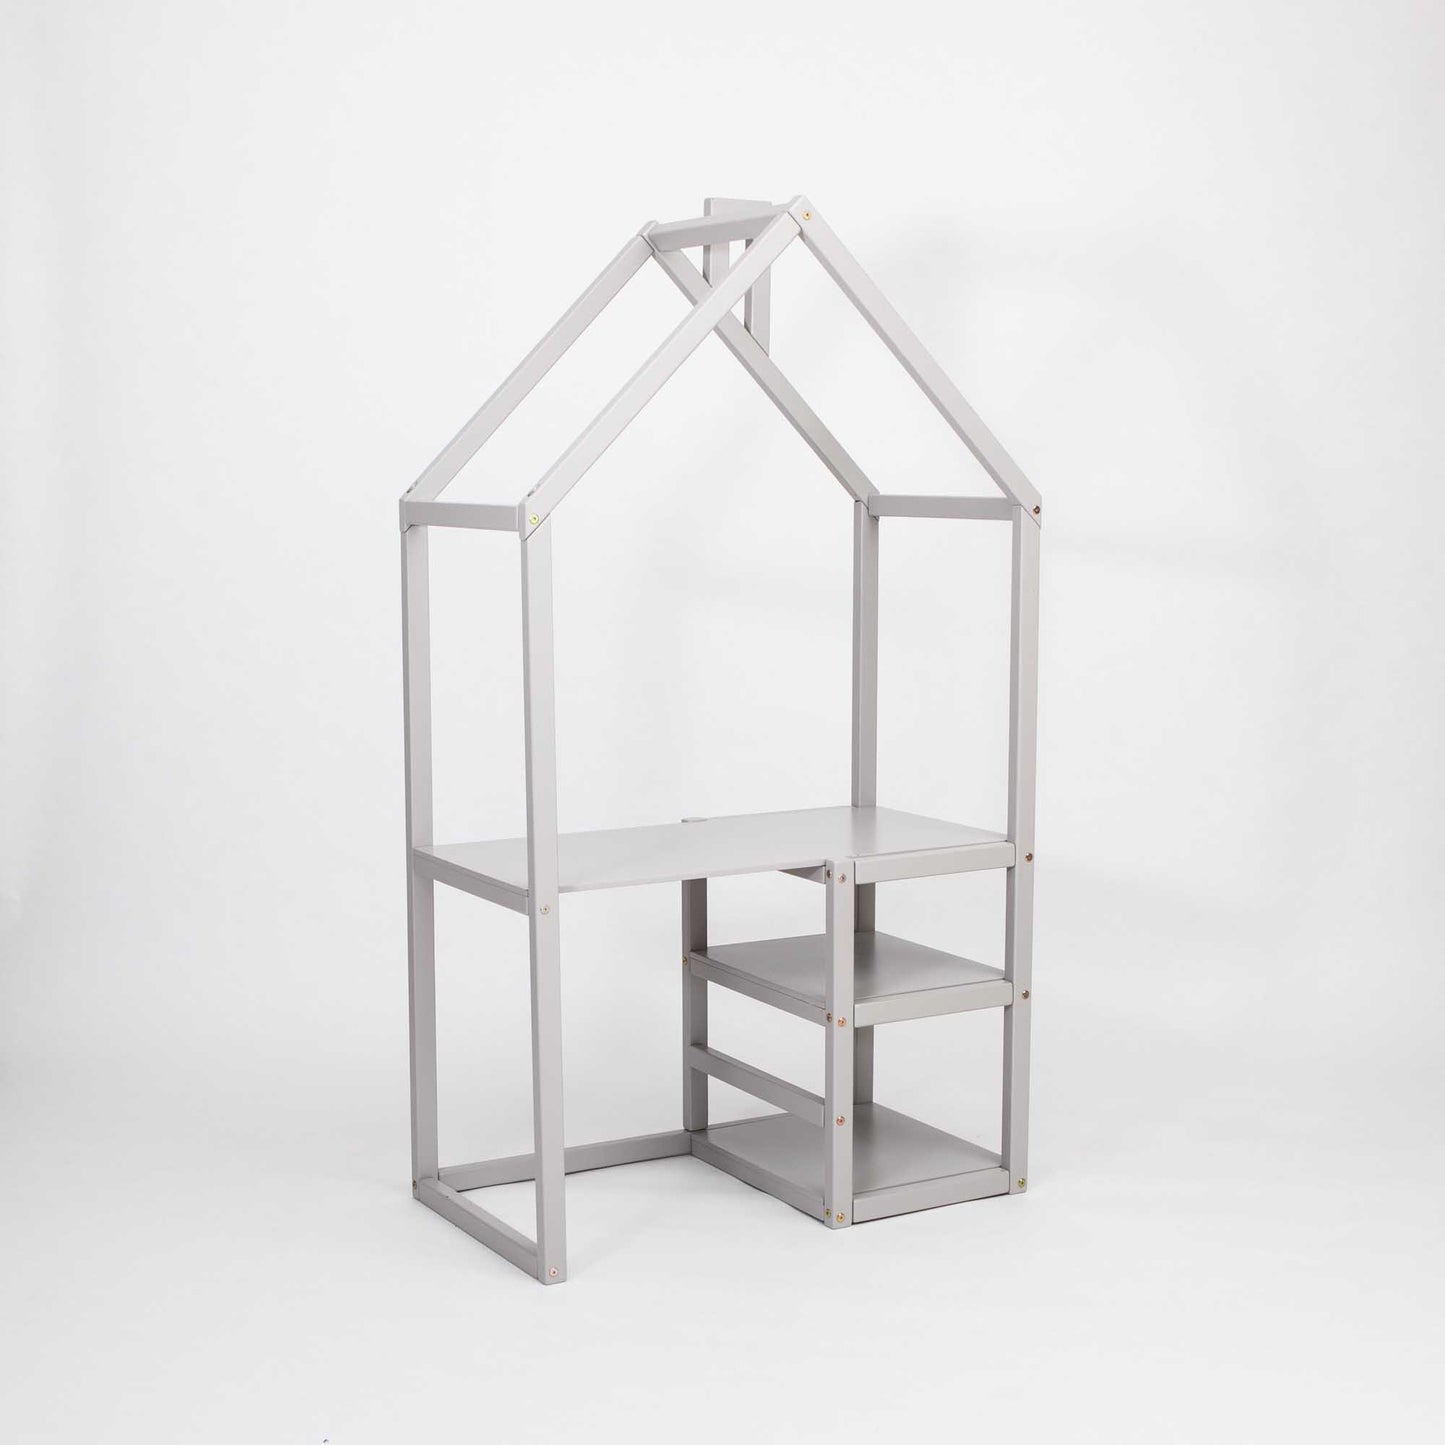 A grey wooden House-shaped toddler desk with shelves and a shelf, perfect for Sweet Home From Wood furniture enthusiasts.